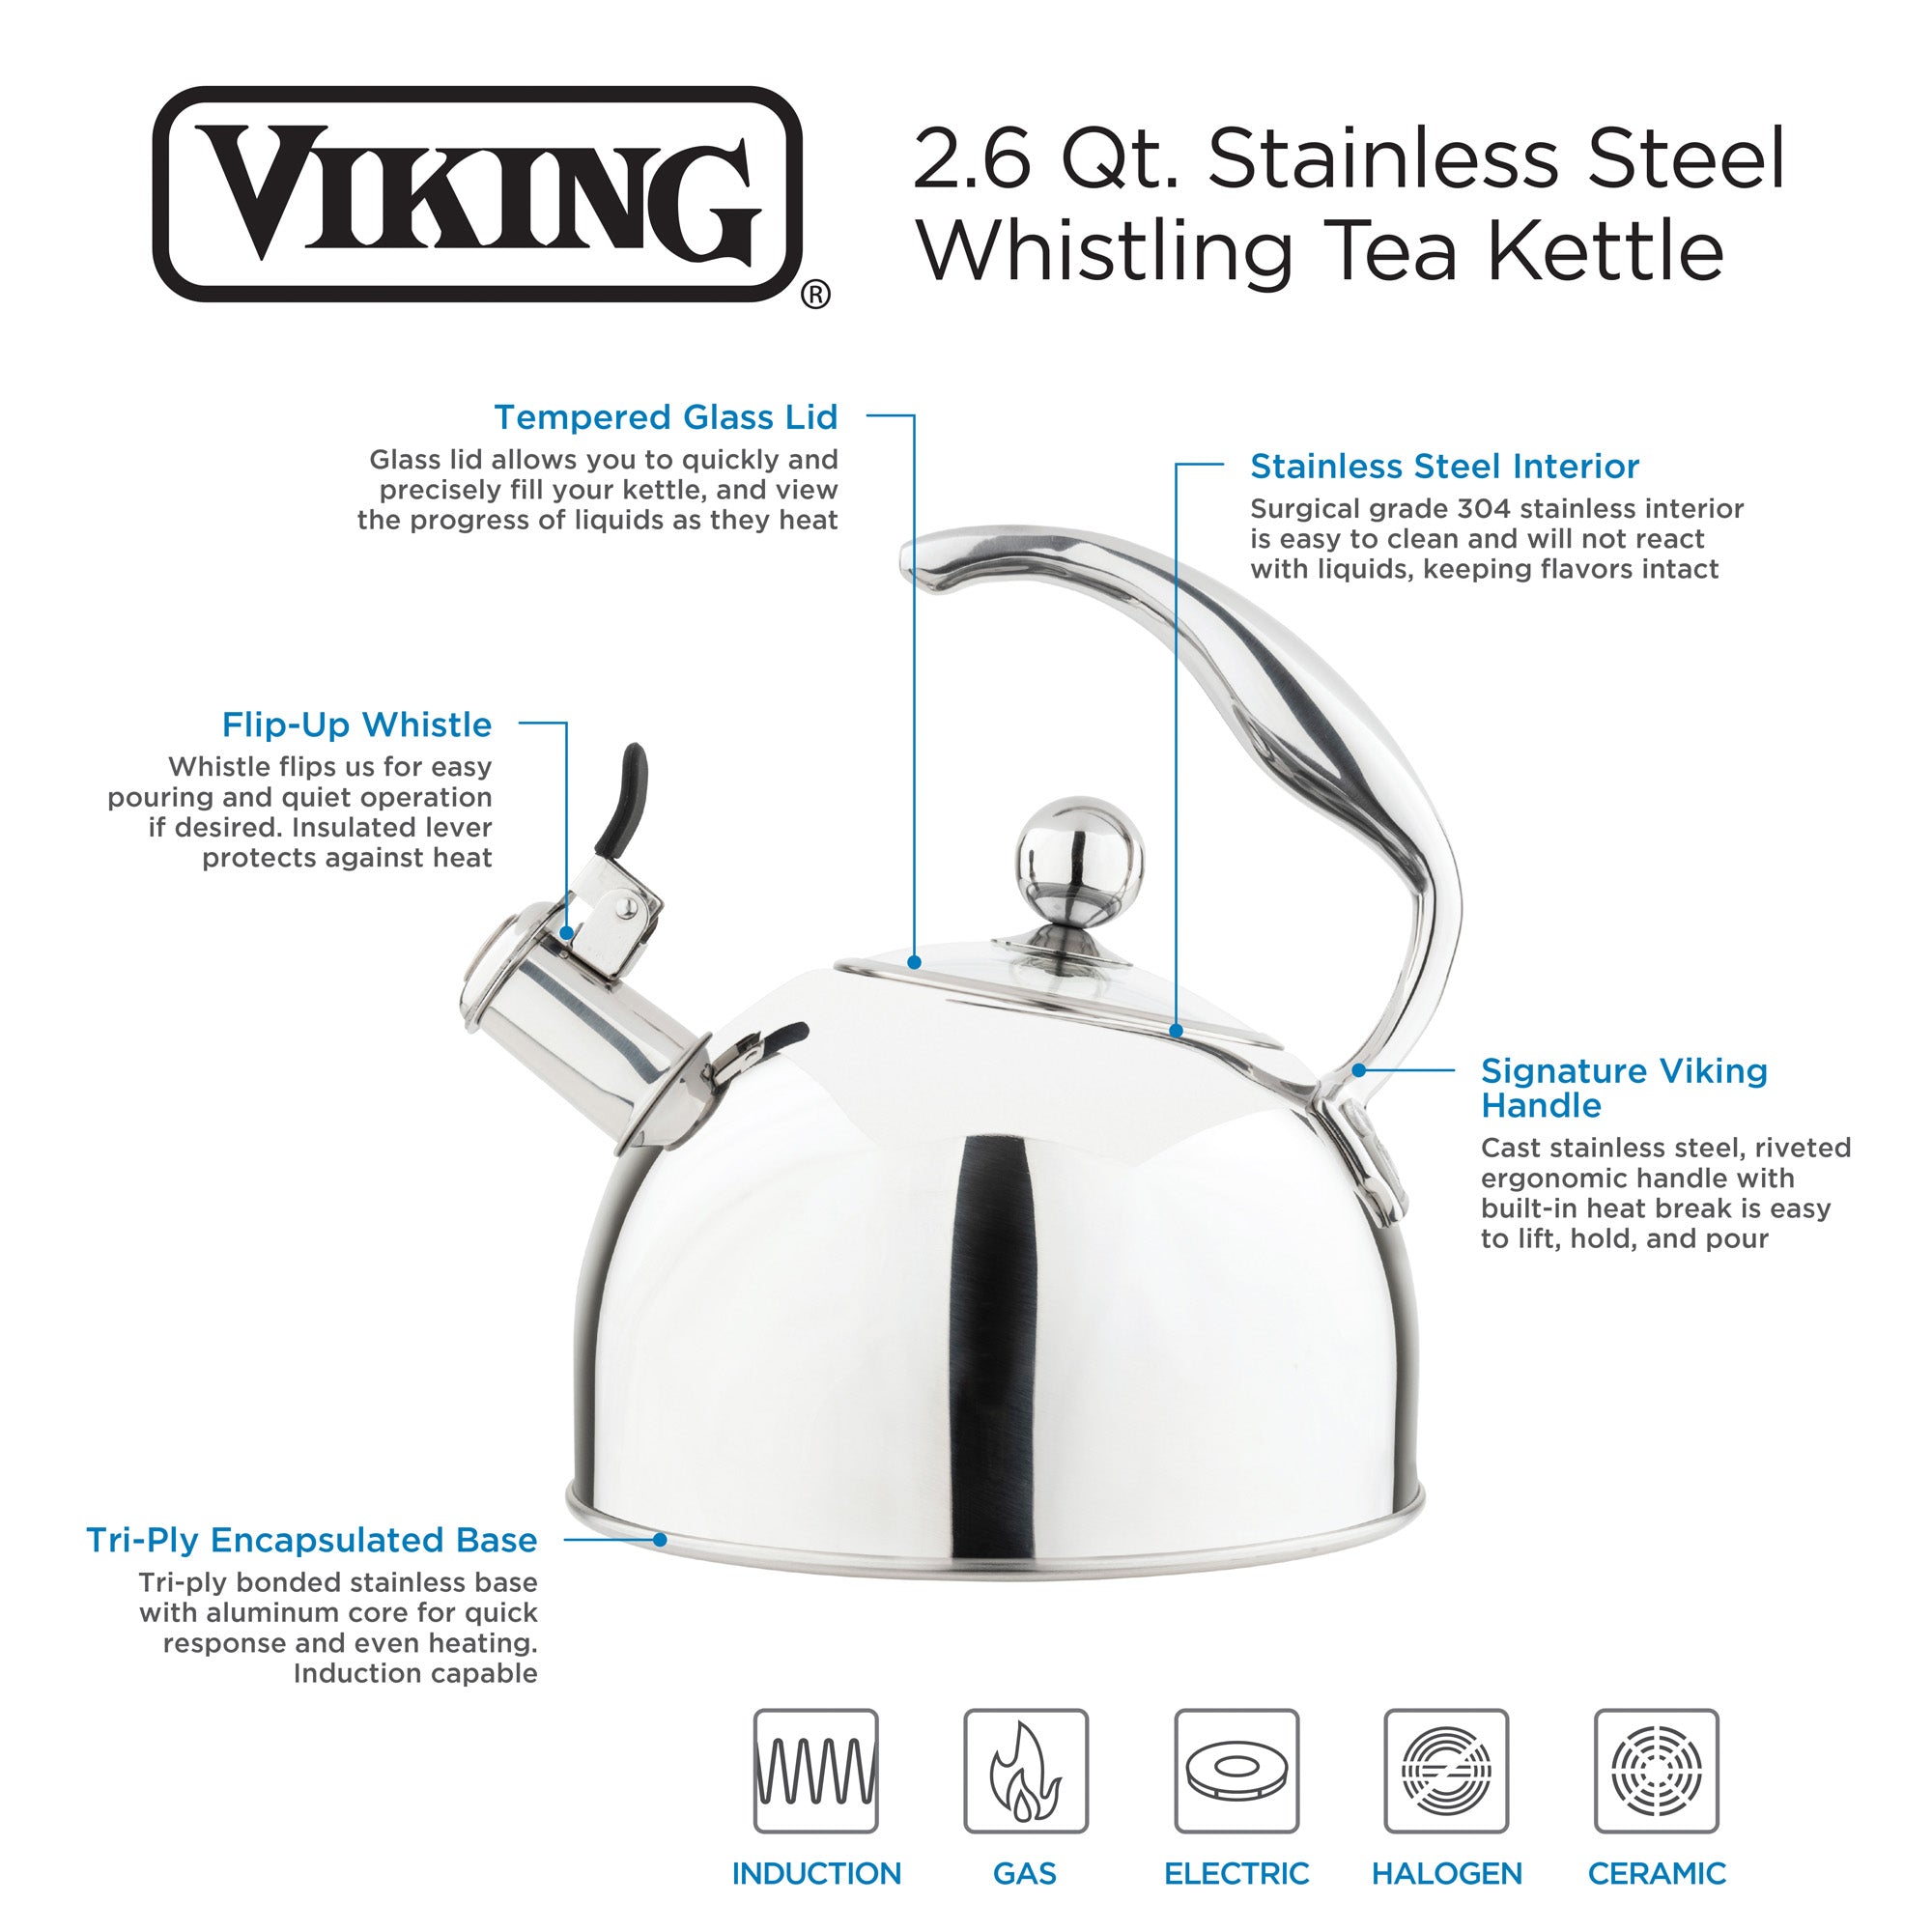 Magnetic Stainless-Steel Tea Kettle (for Induction Cooktops) from